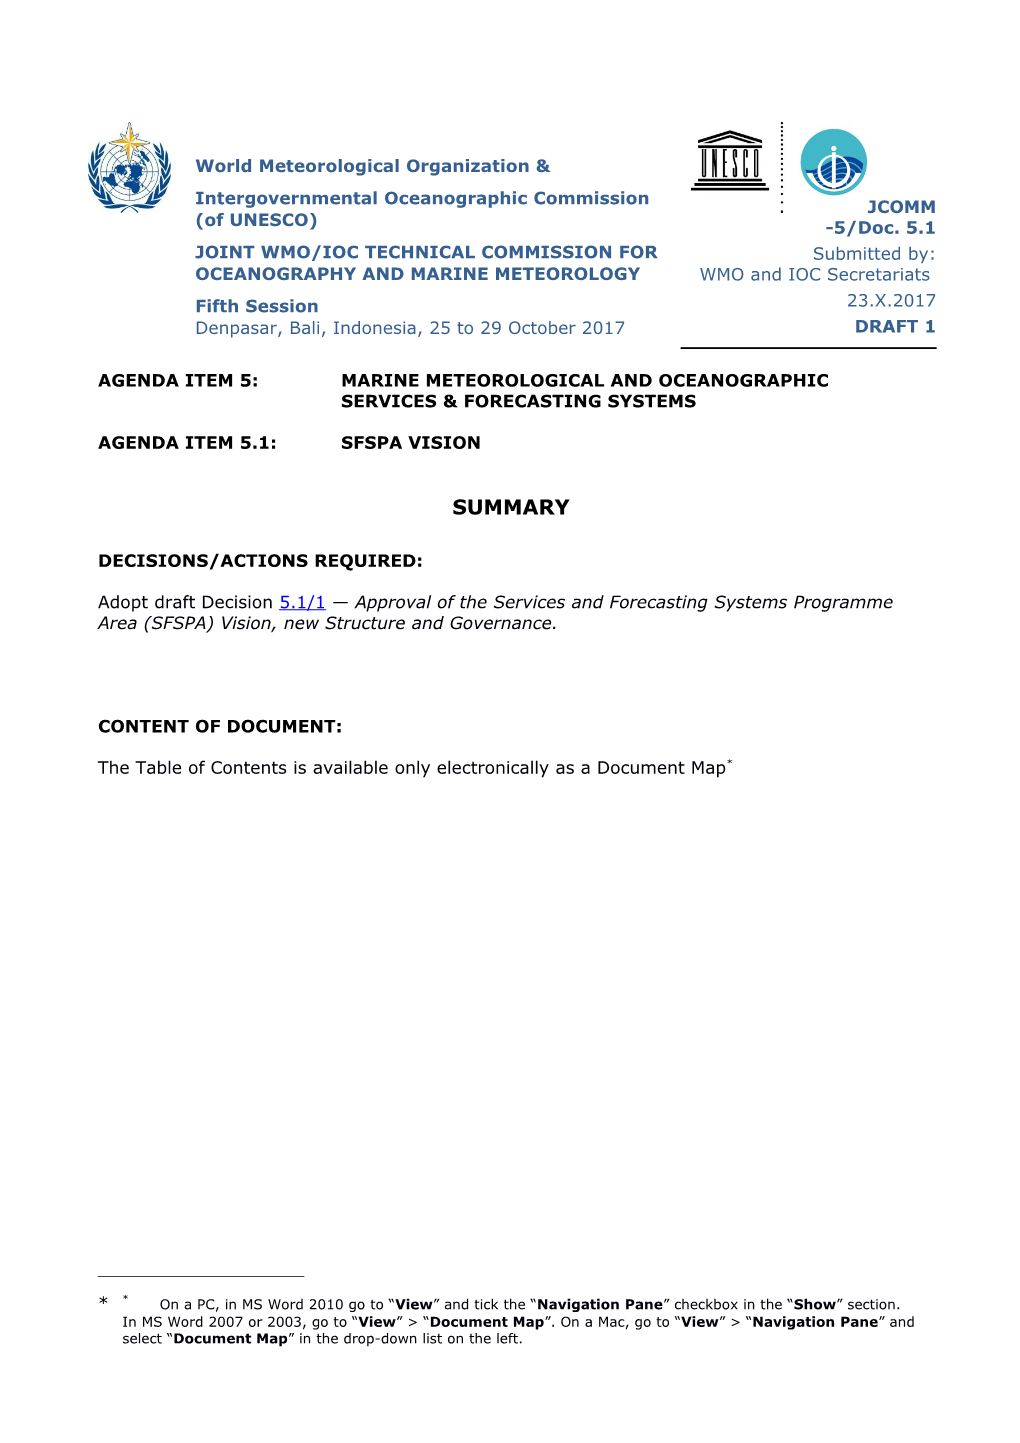 Agenda Item 5:Marine Meteorological and Oceanographic Services & Forecasting Systems